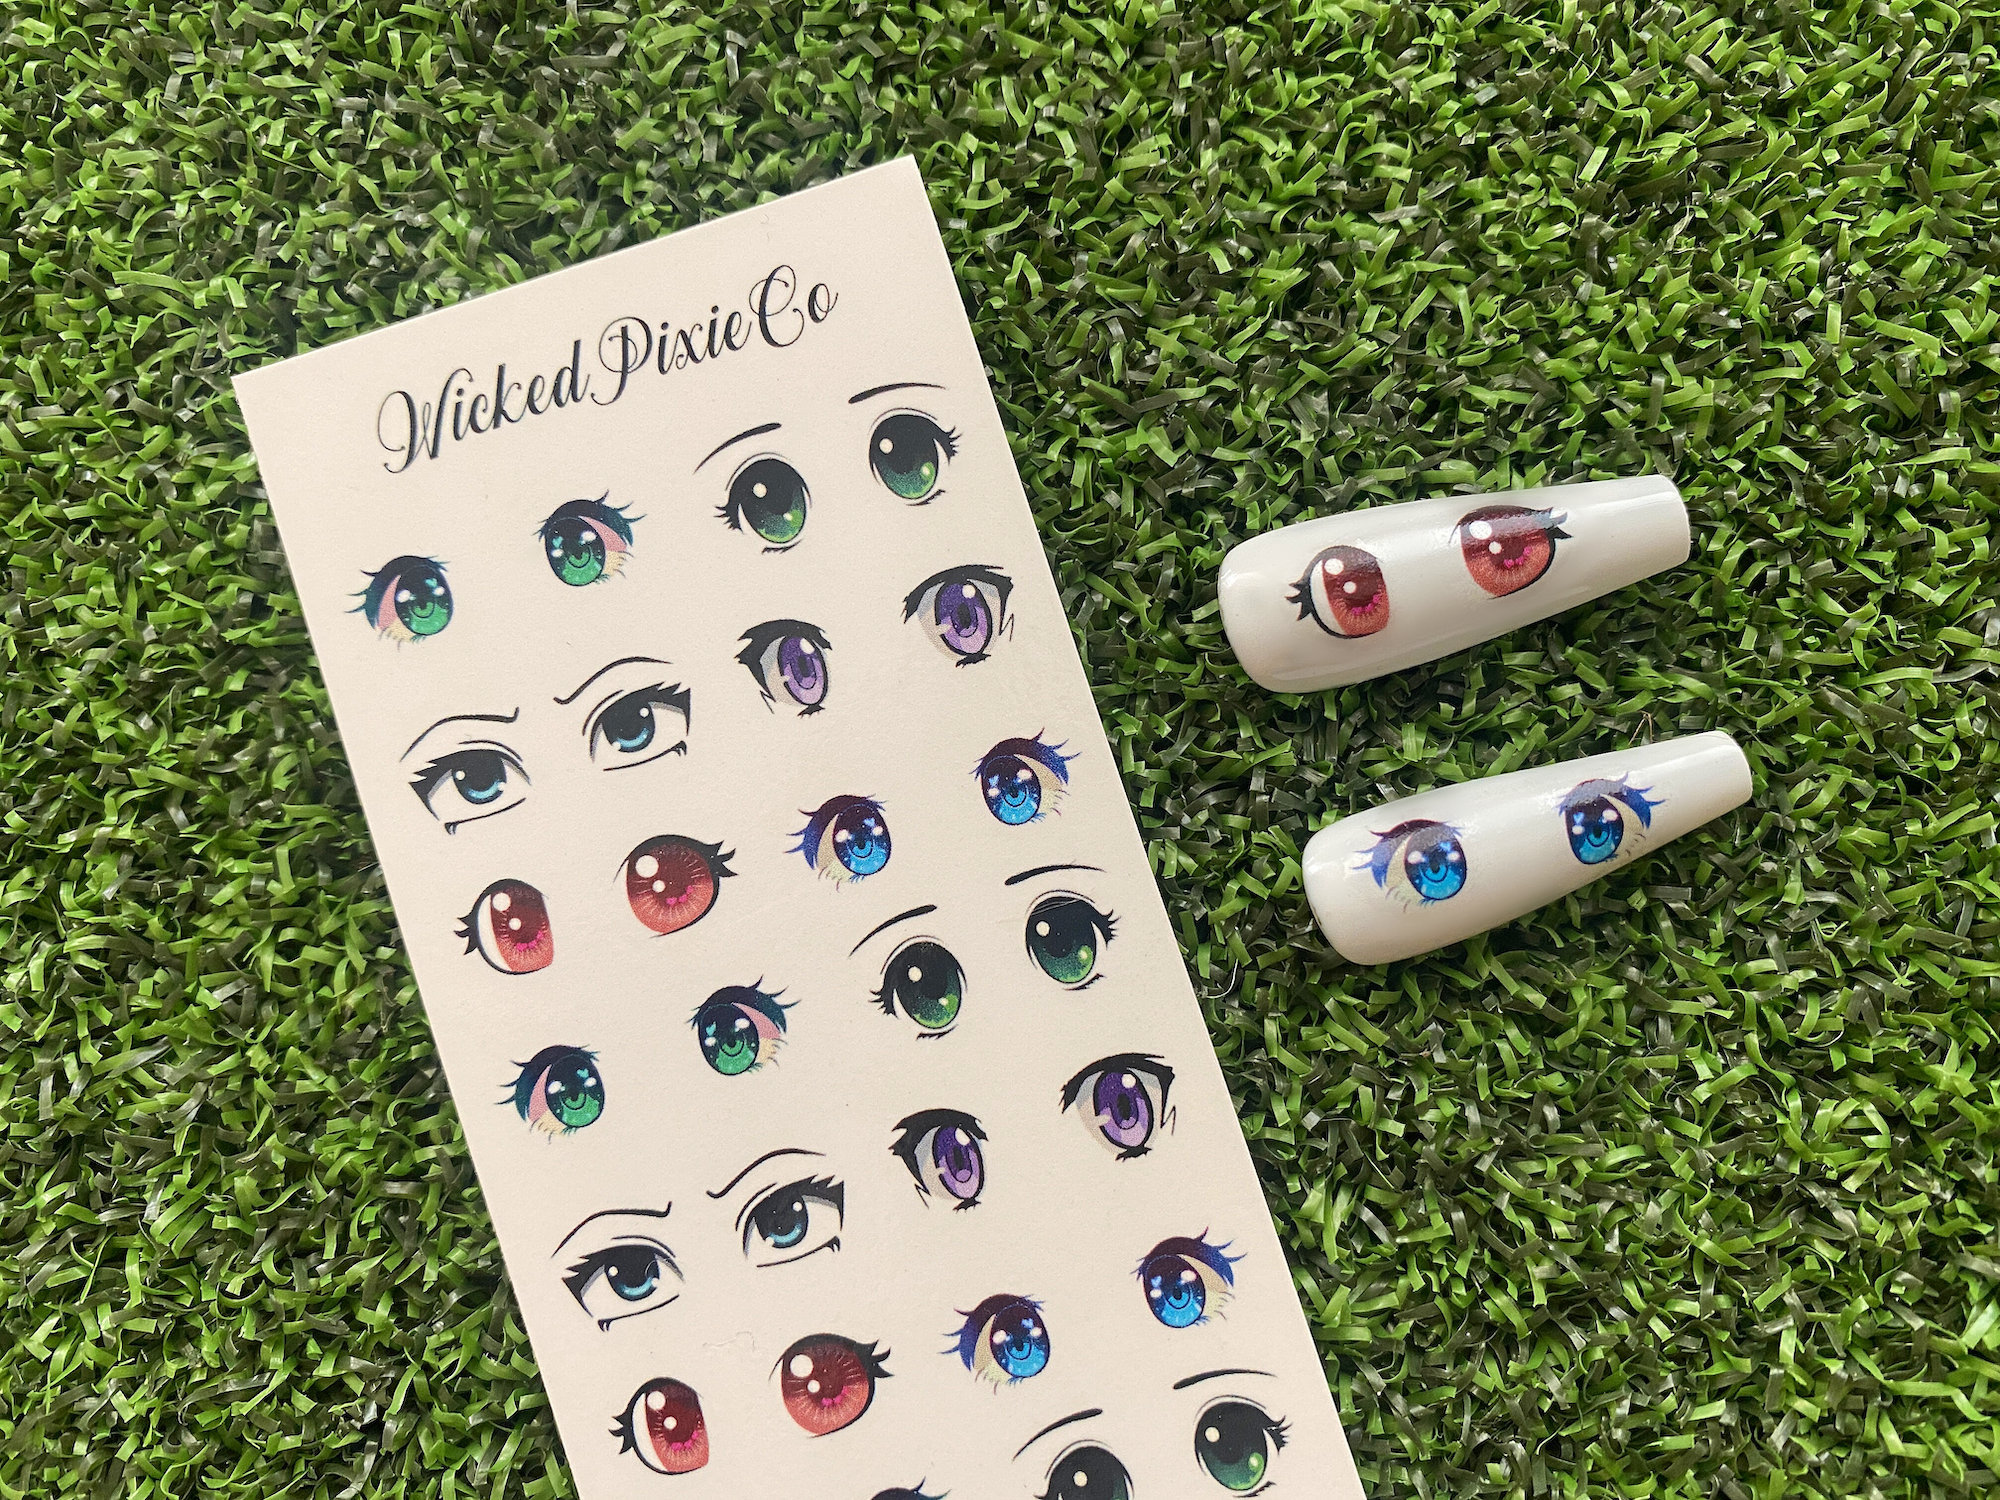 The Nail Shop (Australia) - These fun anime-inspired nails are done by the  talented @nailswithteresa 🌸. Her client loves incorporating dried flowers.  Just love this combos! #driedflowers #nailart #nailartaddict #thenailshop  #nailswithteresa #sydneynails #